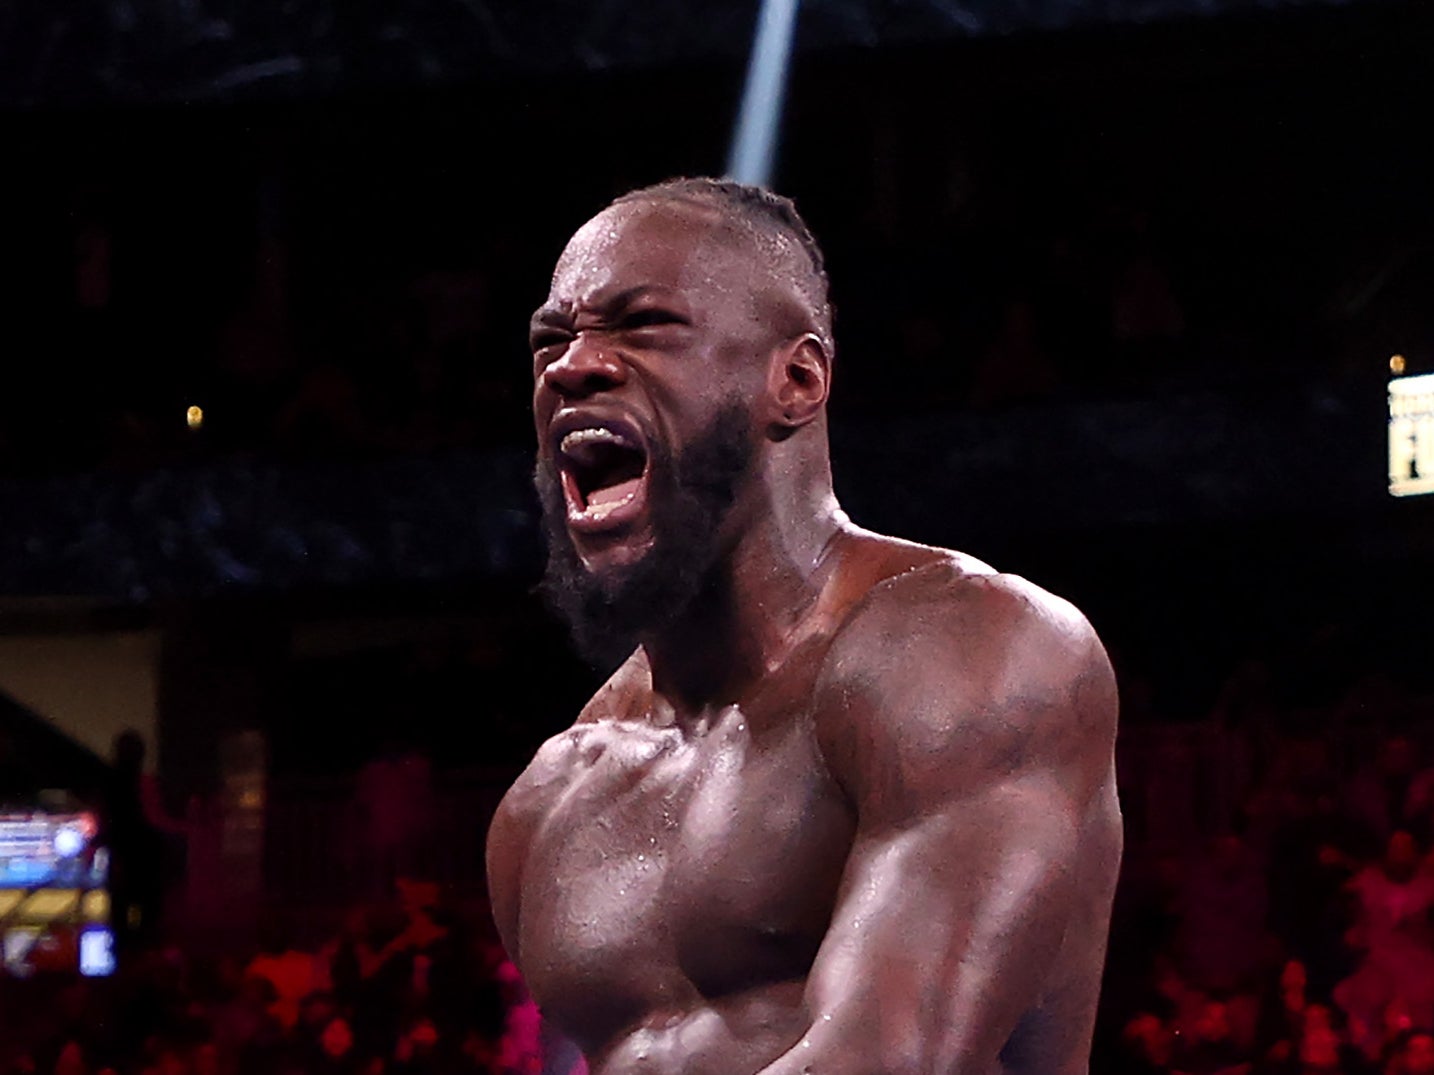 Deontay Wilder reacts after knocking down Tyson Fury